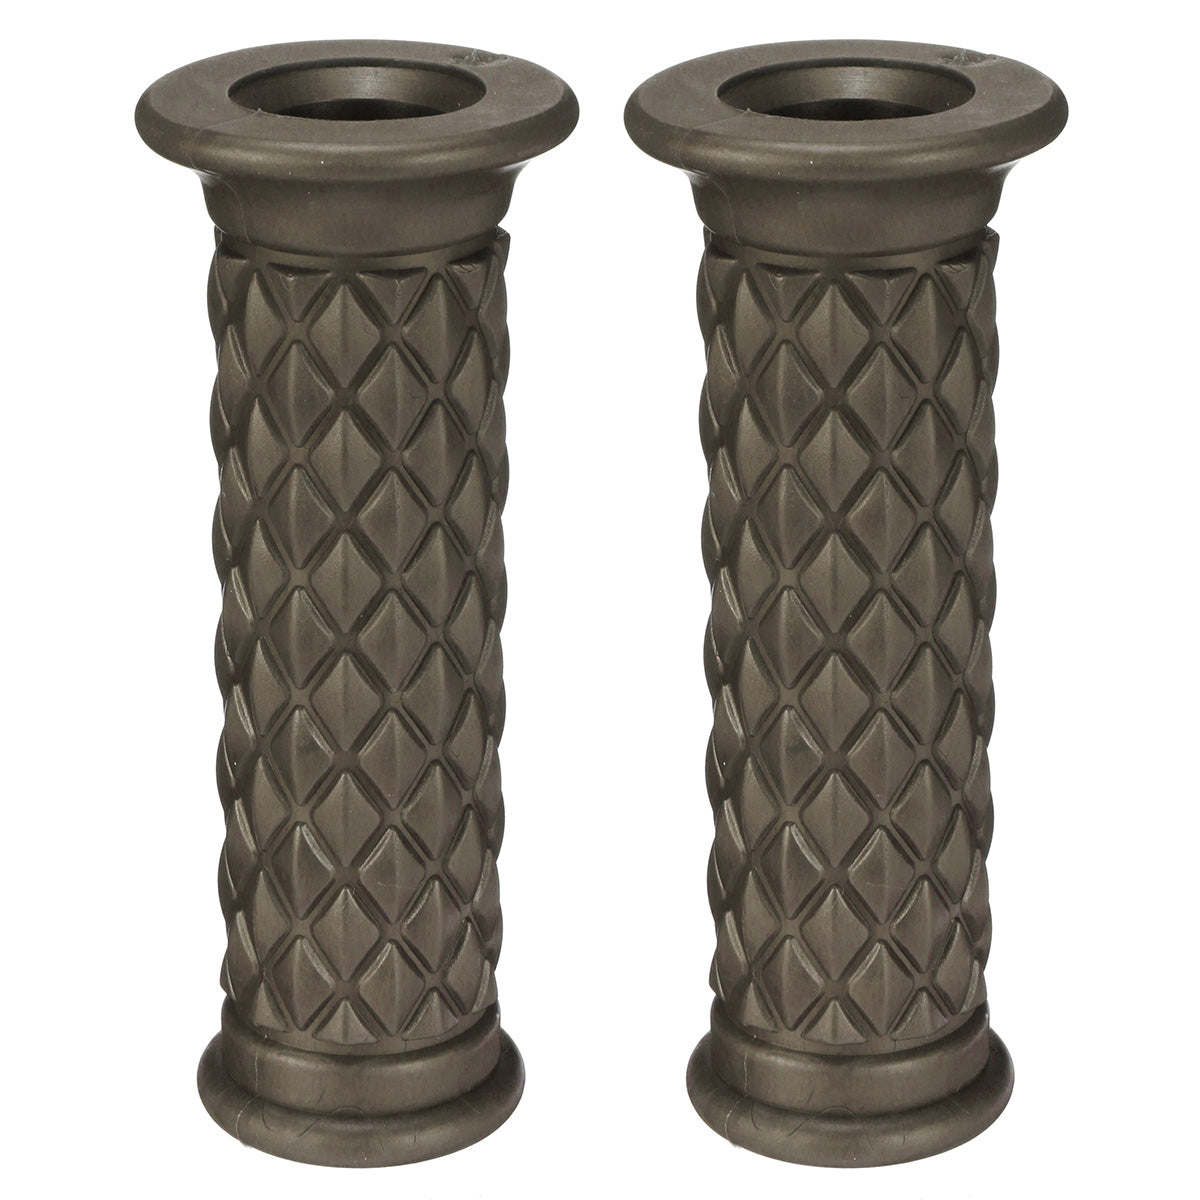 Dark Olive Green 7/8inch Universal Motorcycle Cafe Racer Classic Rubber Handlebar Hand Grips Bar